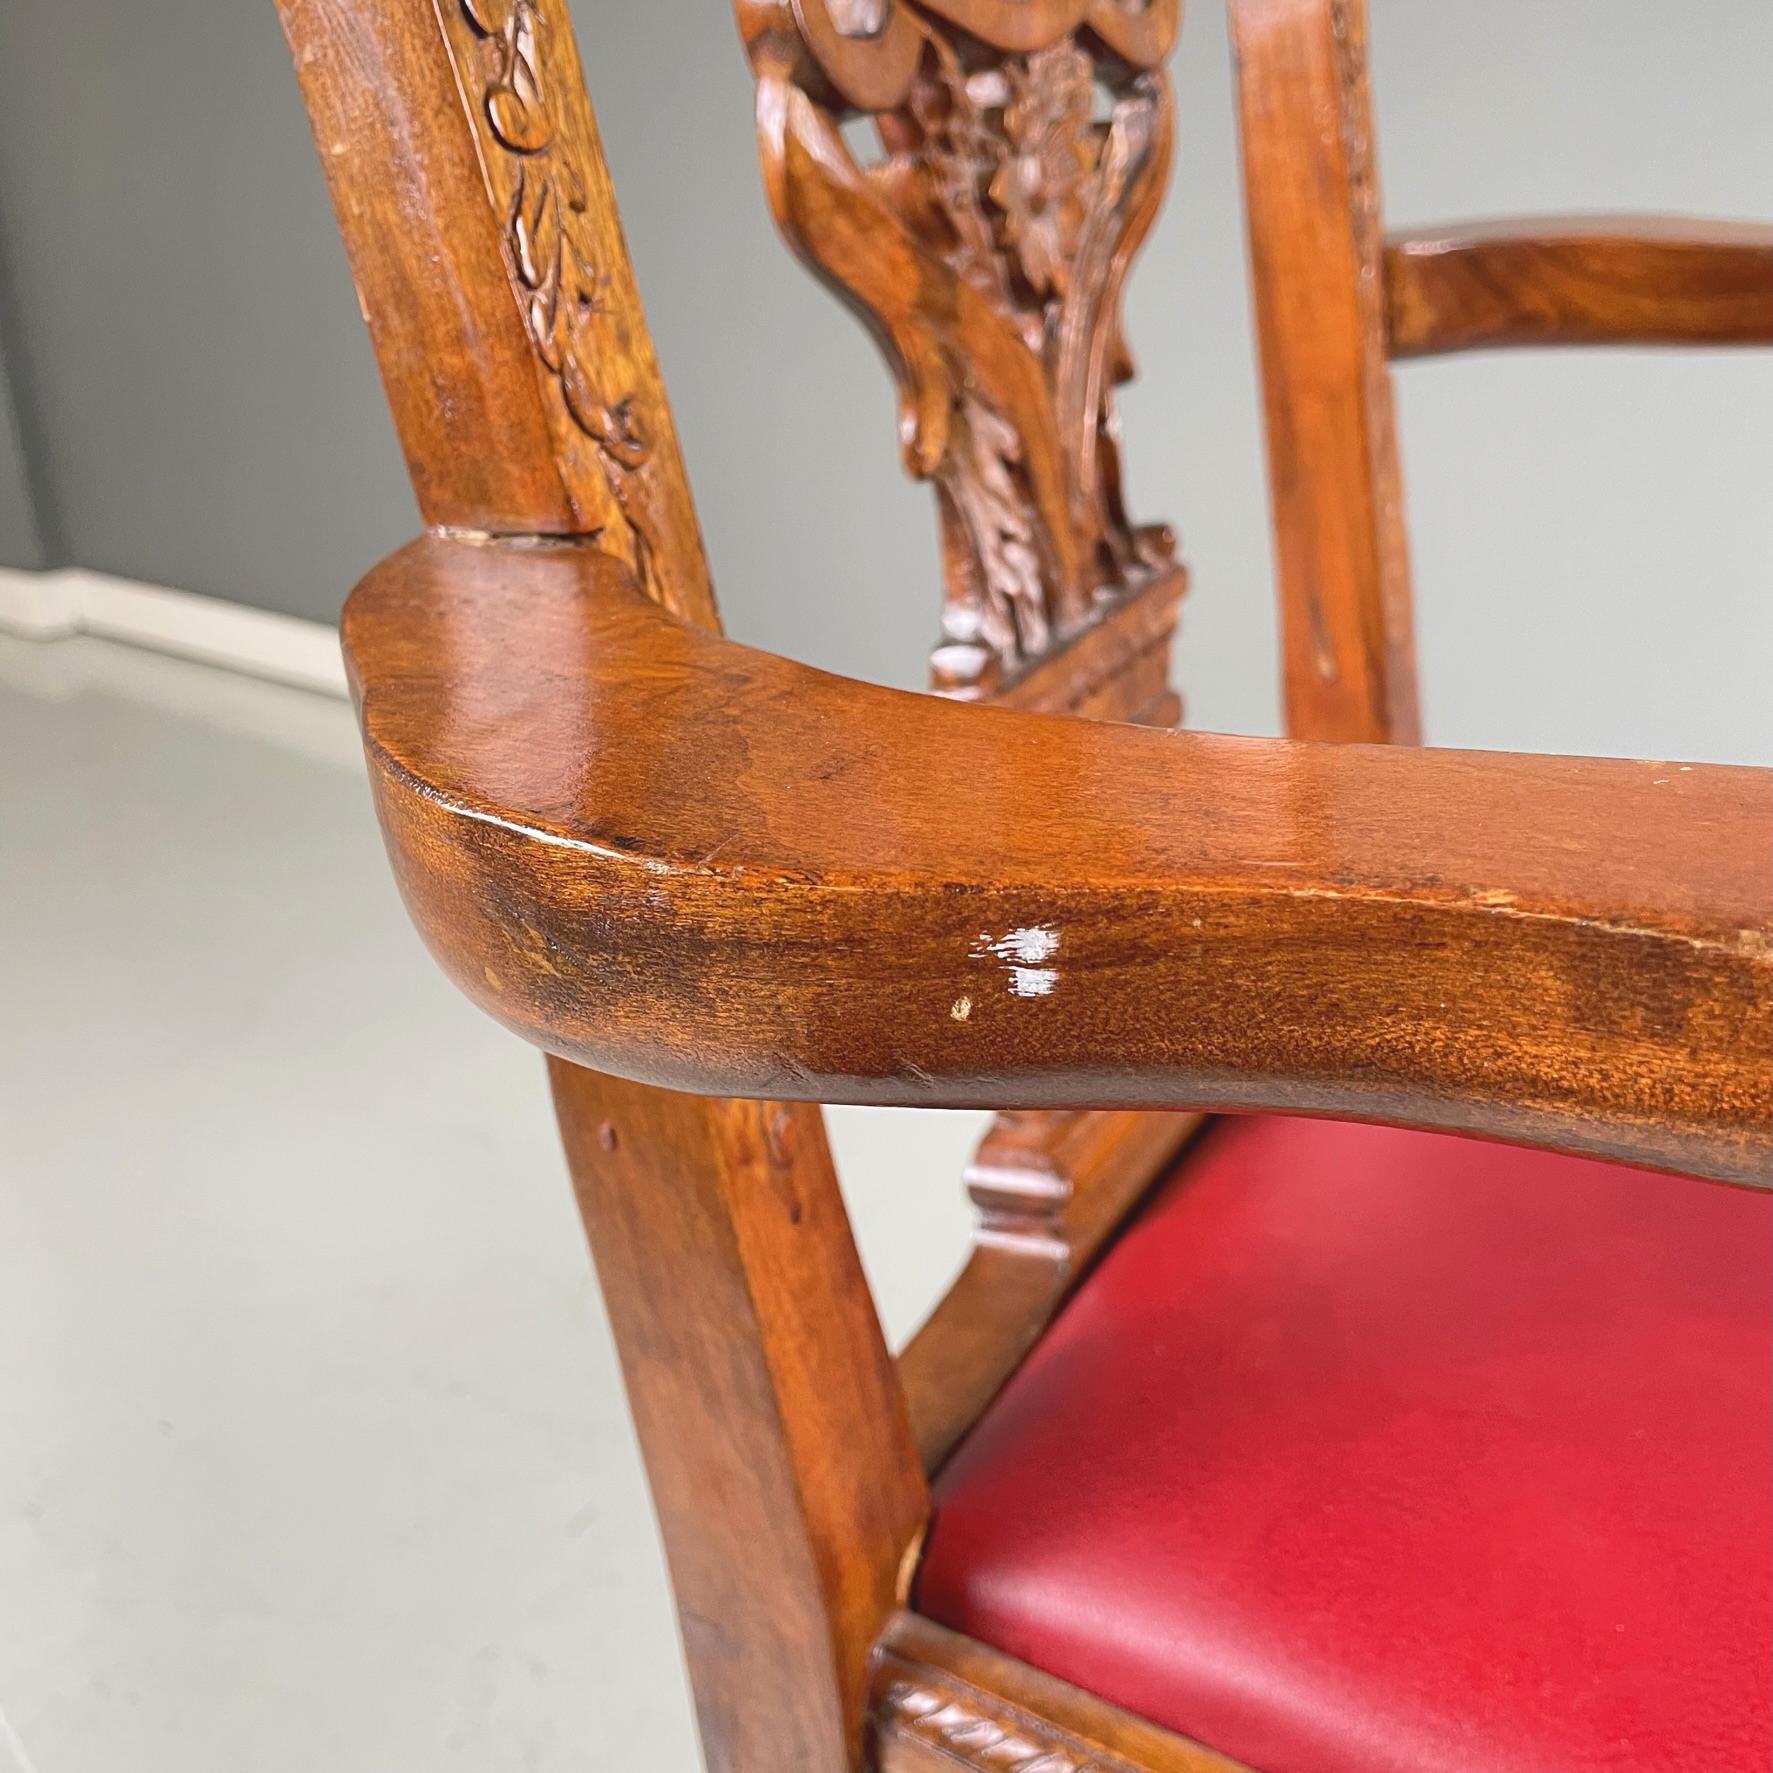 Chippendale Style Wooden Chairs with Red Leather, Early 1900s For Sale 9